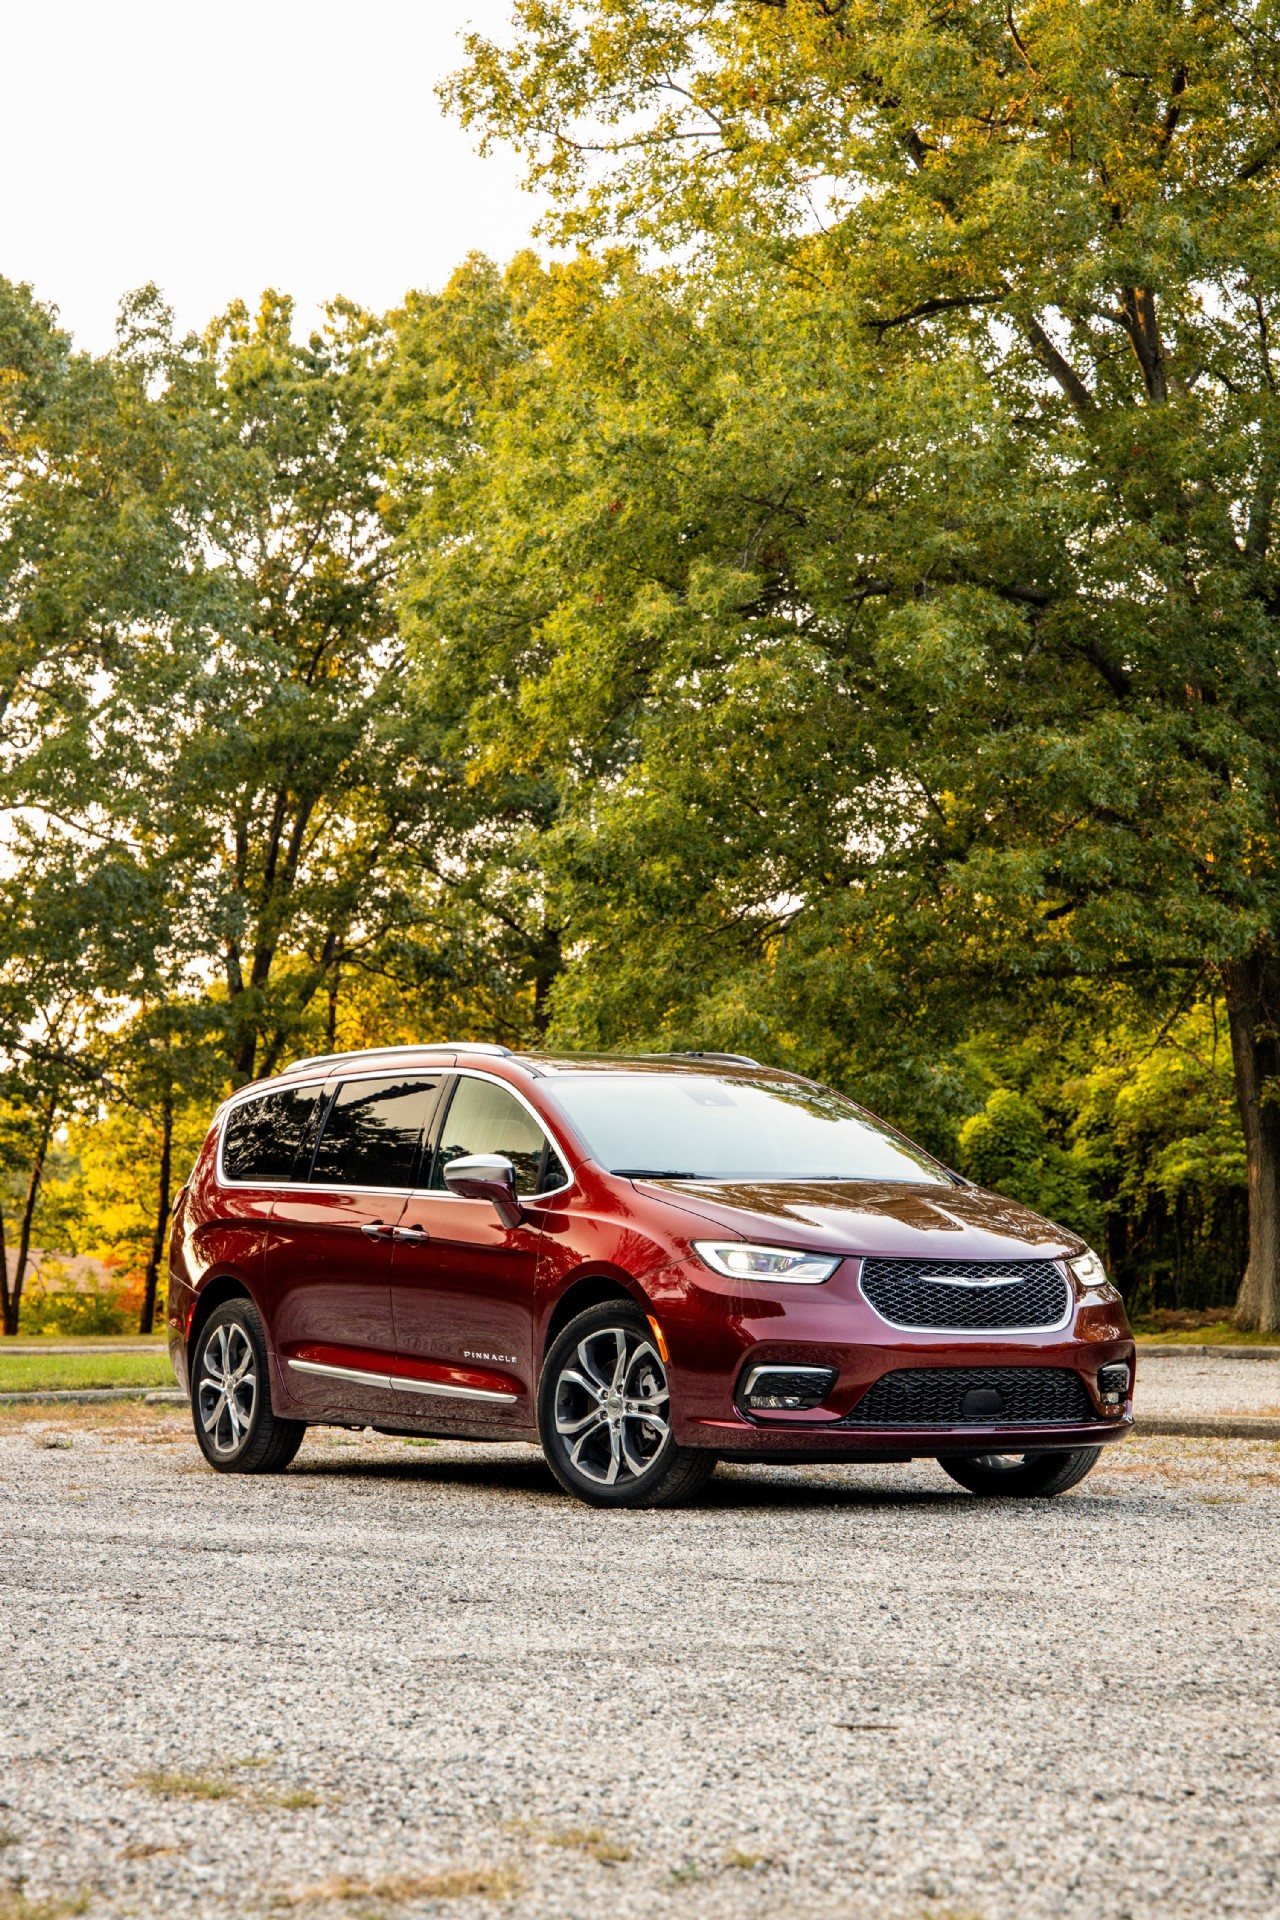 The recommended oil type and oil capacity for a Chrysler Pacifica